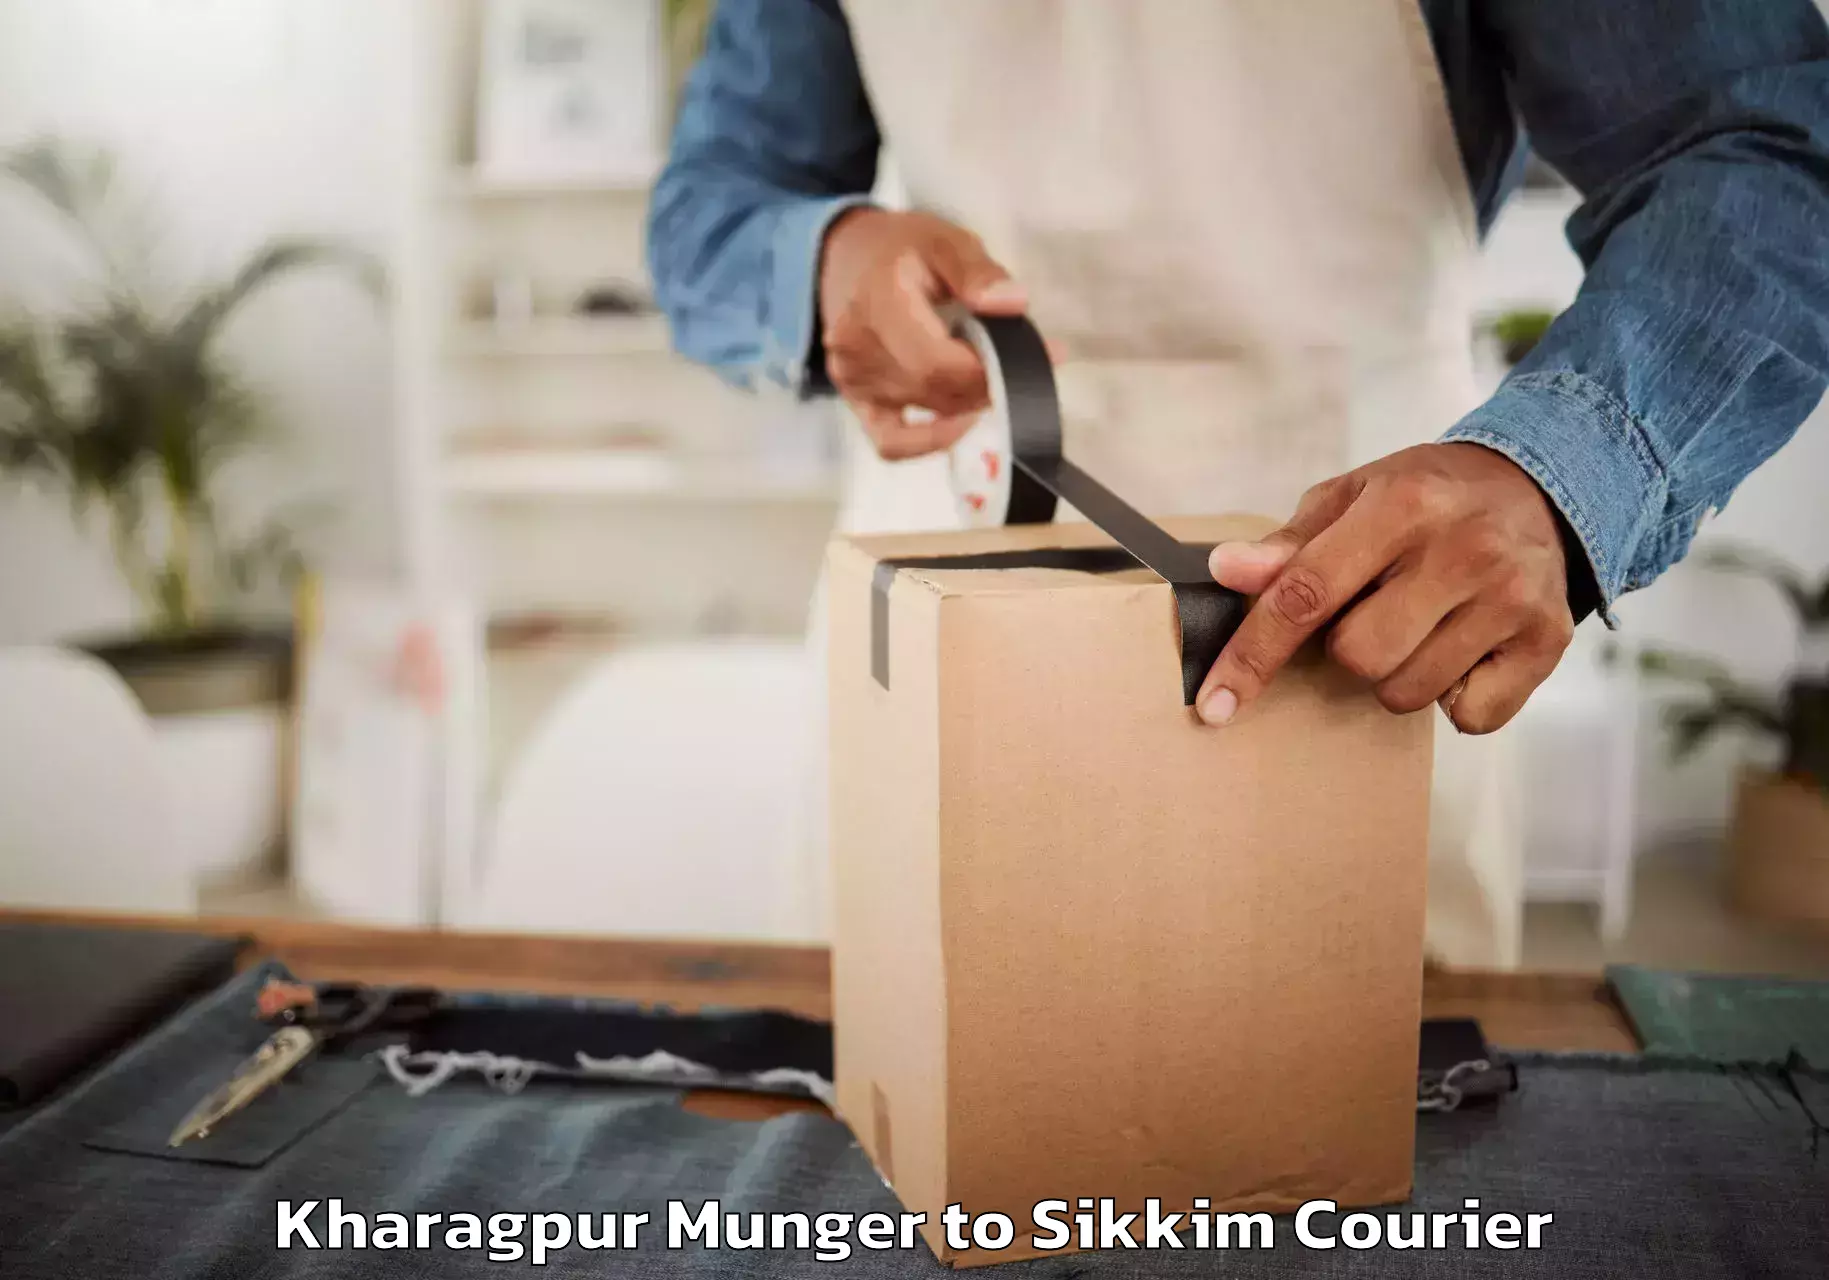 Dependable moving services Kharagpur Munger to Pelling